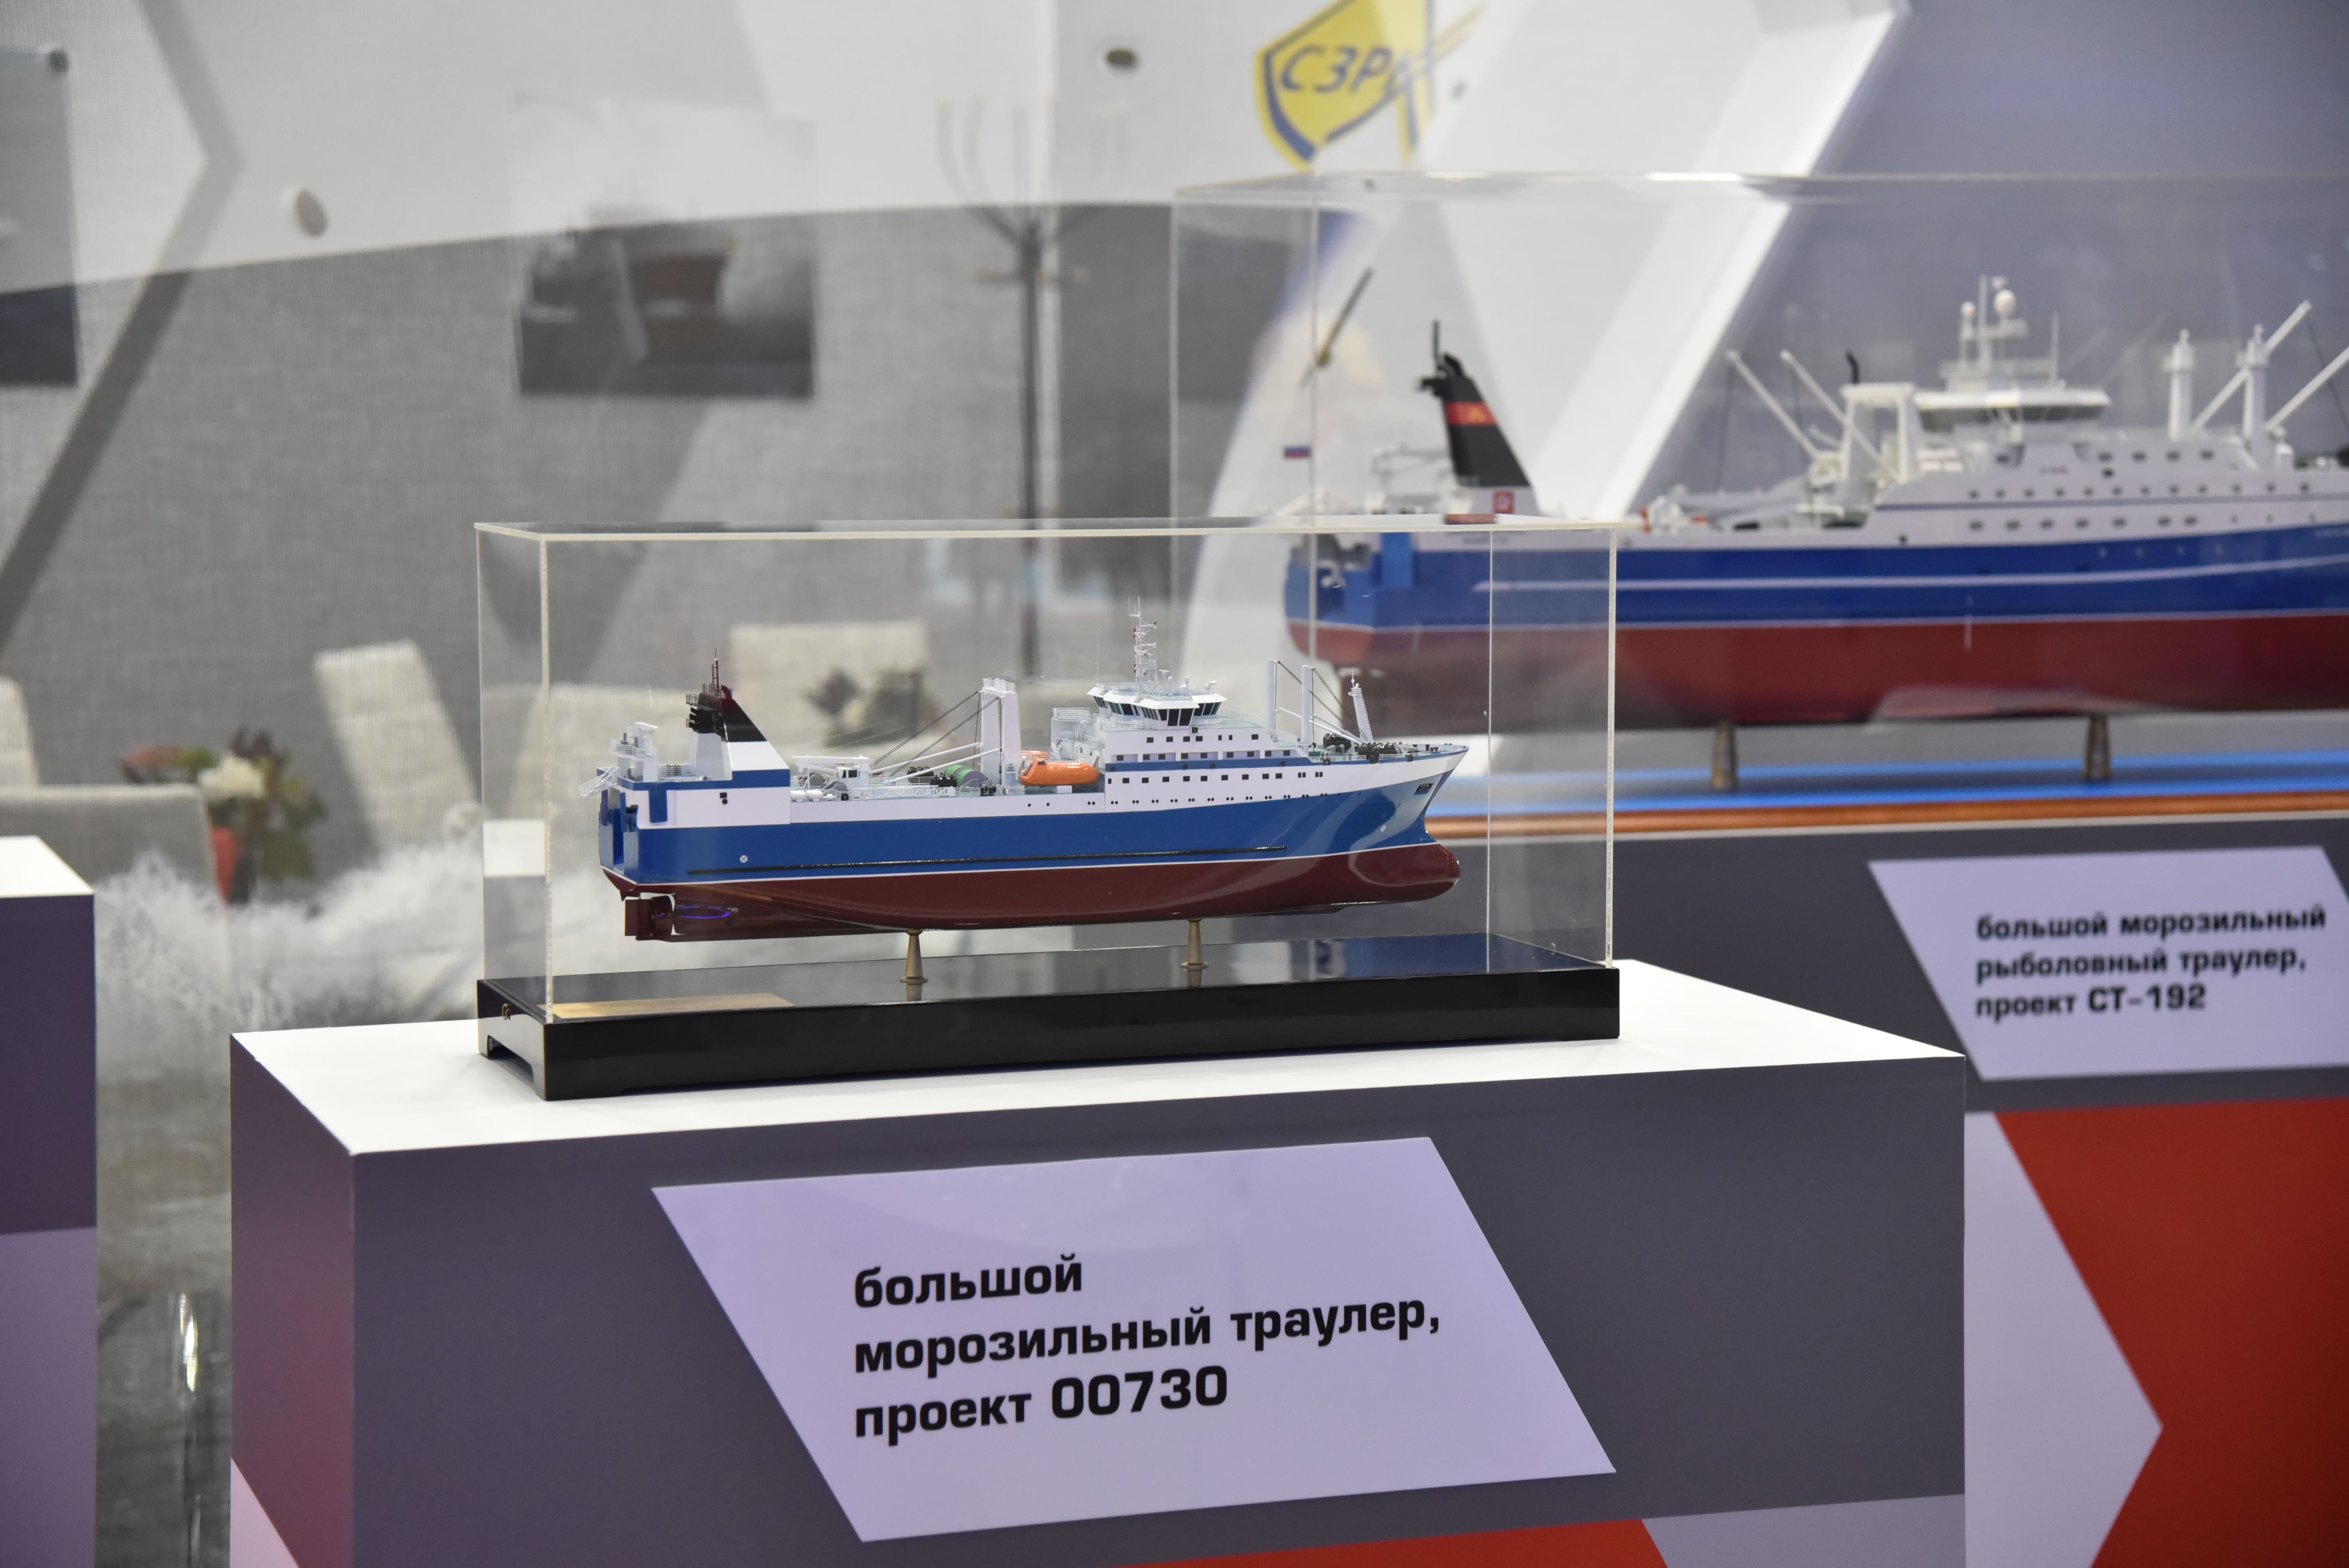 Prospects and Needs of the Fishery Industry: All Vessels at Seafood Expo Russia